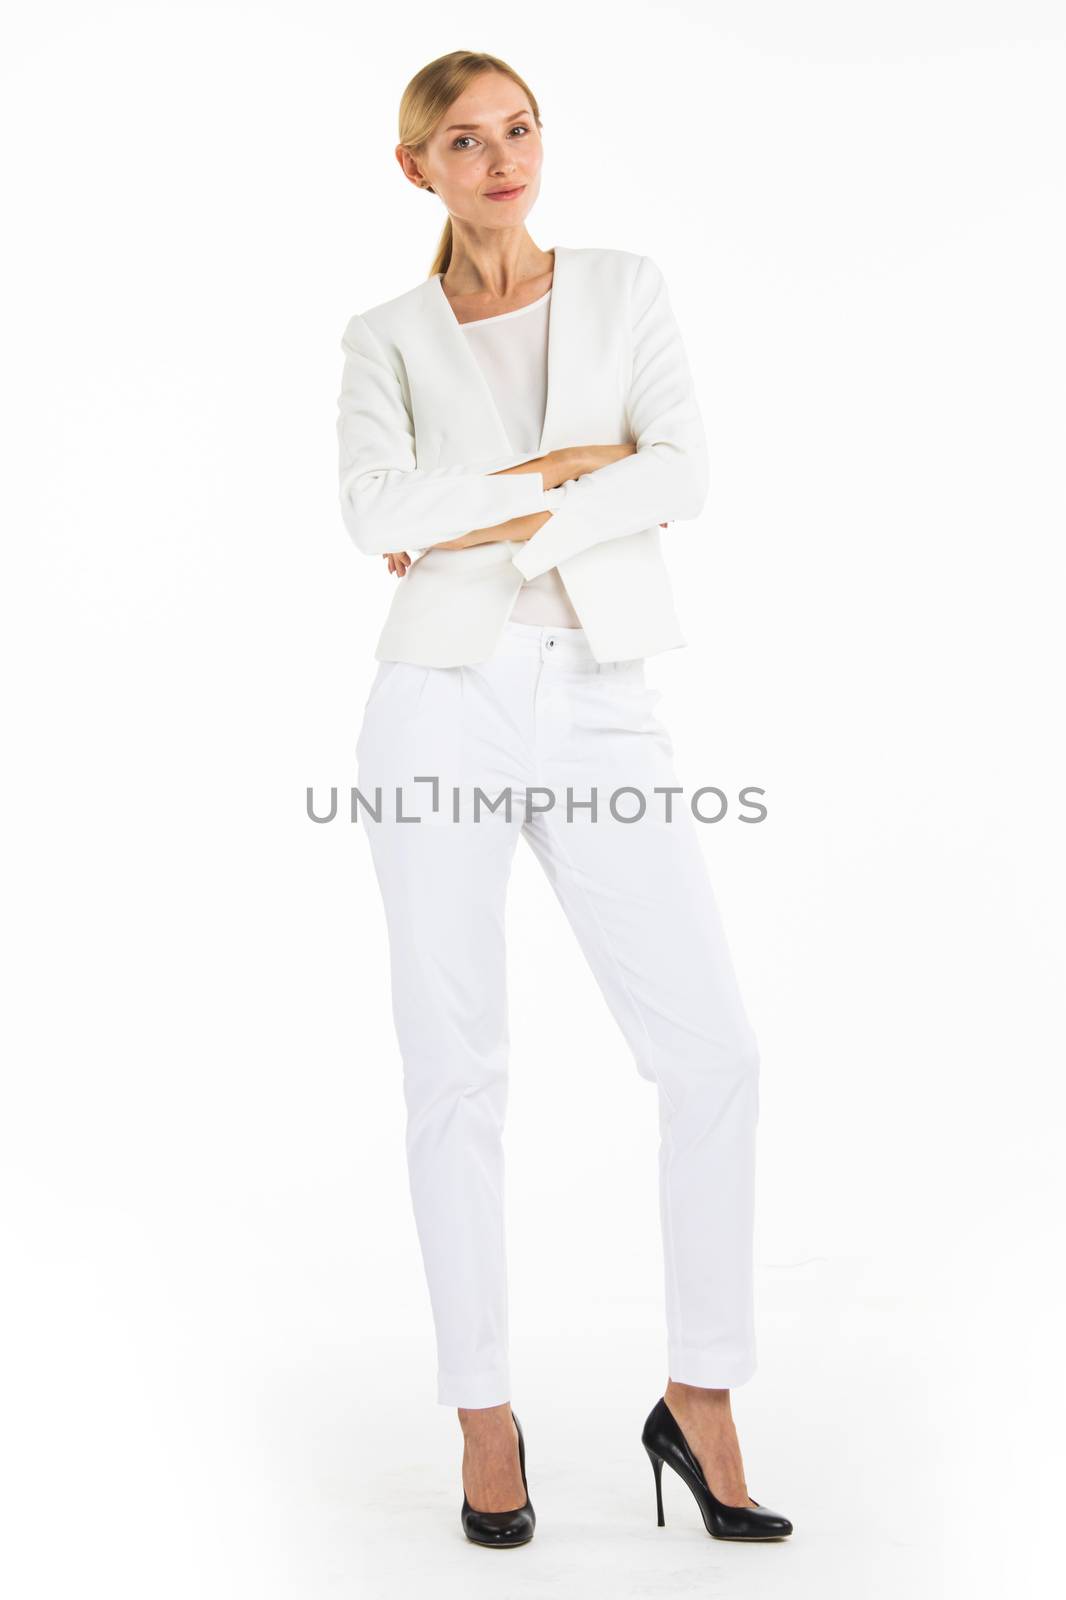 Portrait of mature smiling business woman in white suit isolated on white background